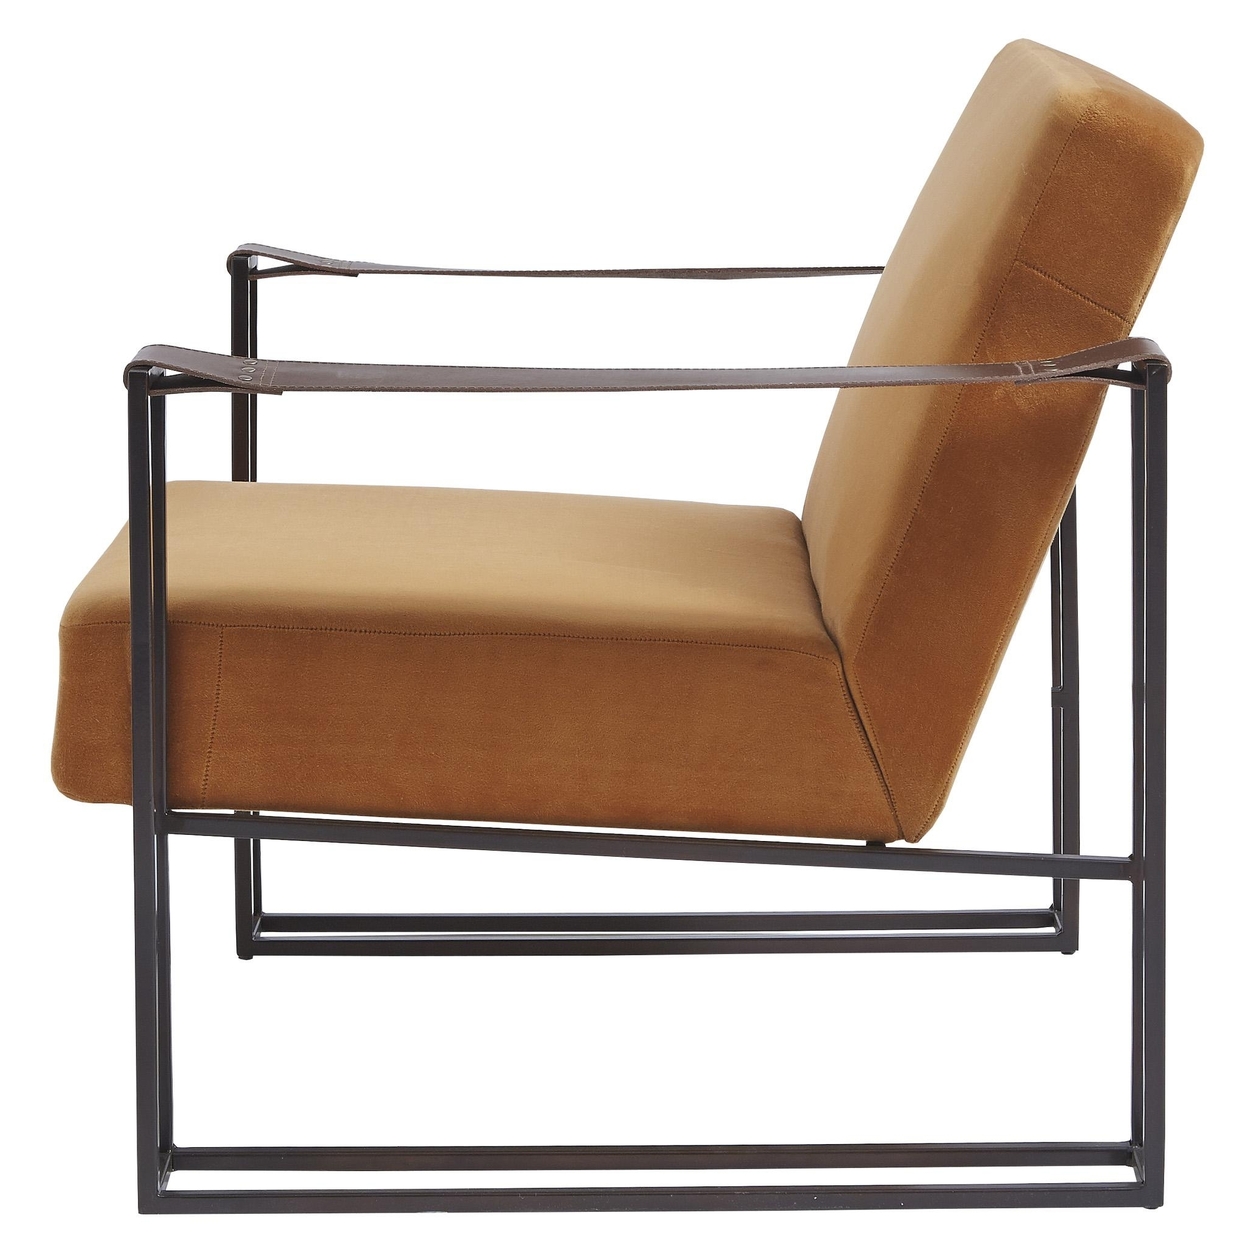 Metal Frame Accent Chair With Padded Seat And Back, Orange And Bronze- Saltoro Sherpi